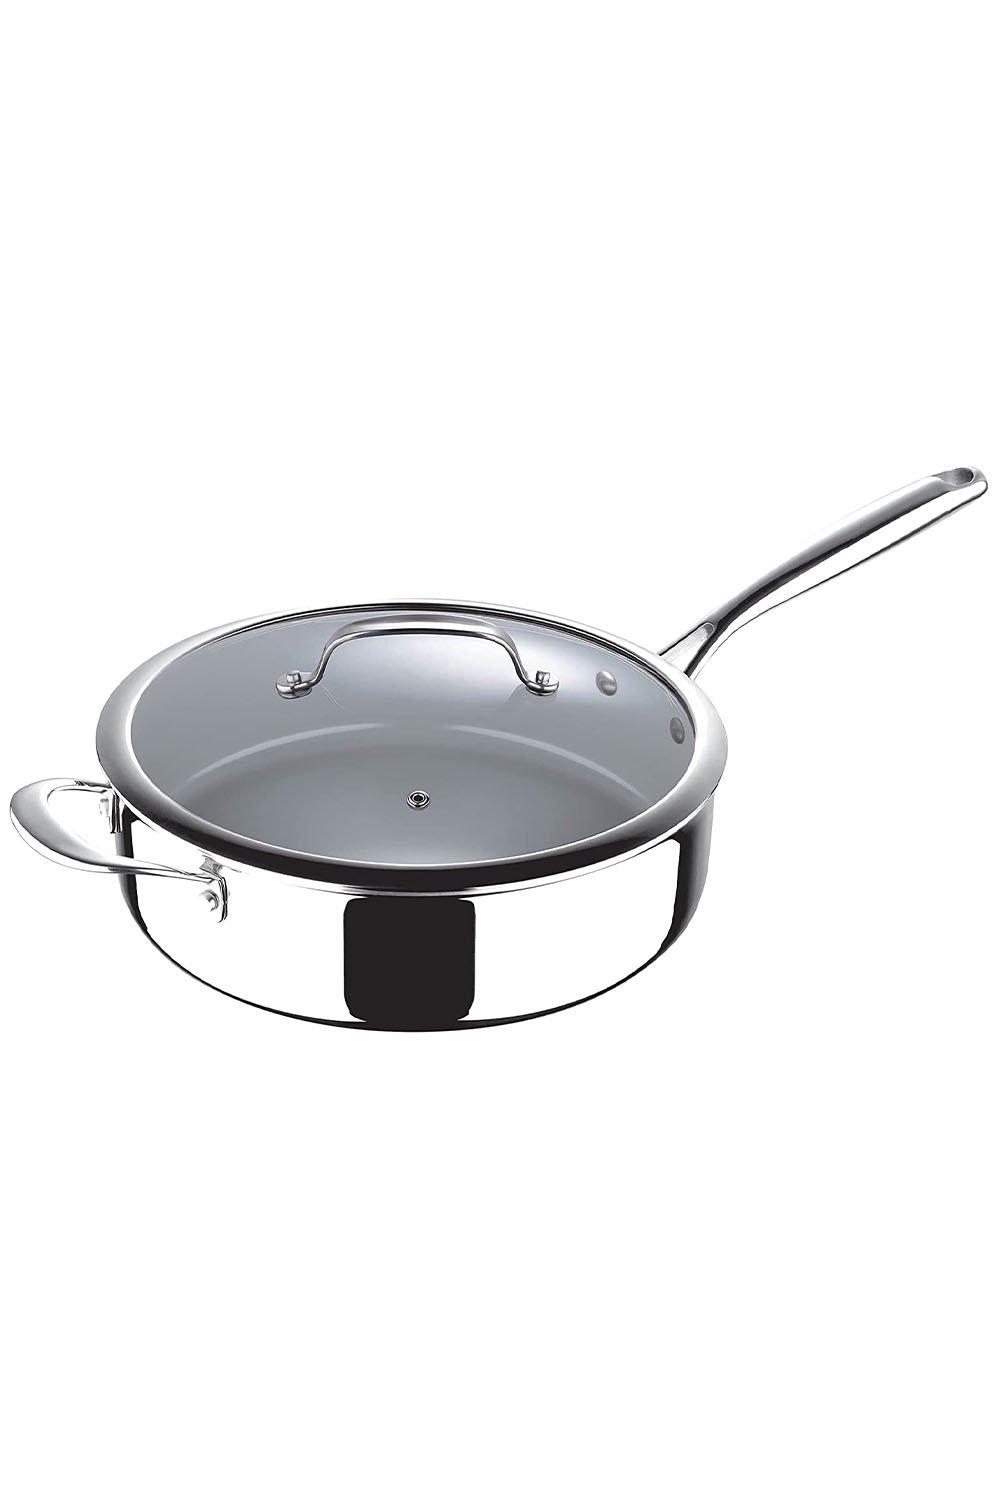 Argent 3 Stainless Steel Non-stick Saute Pan with Glass Lid 28cm Silver